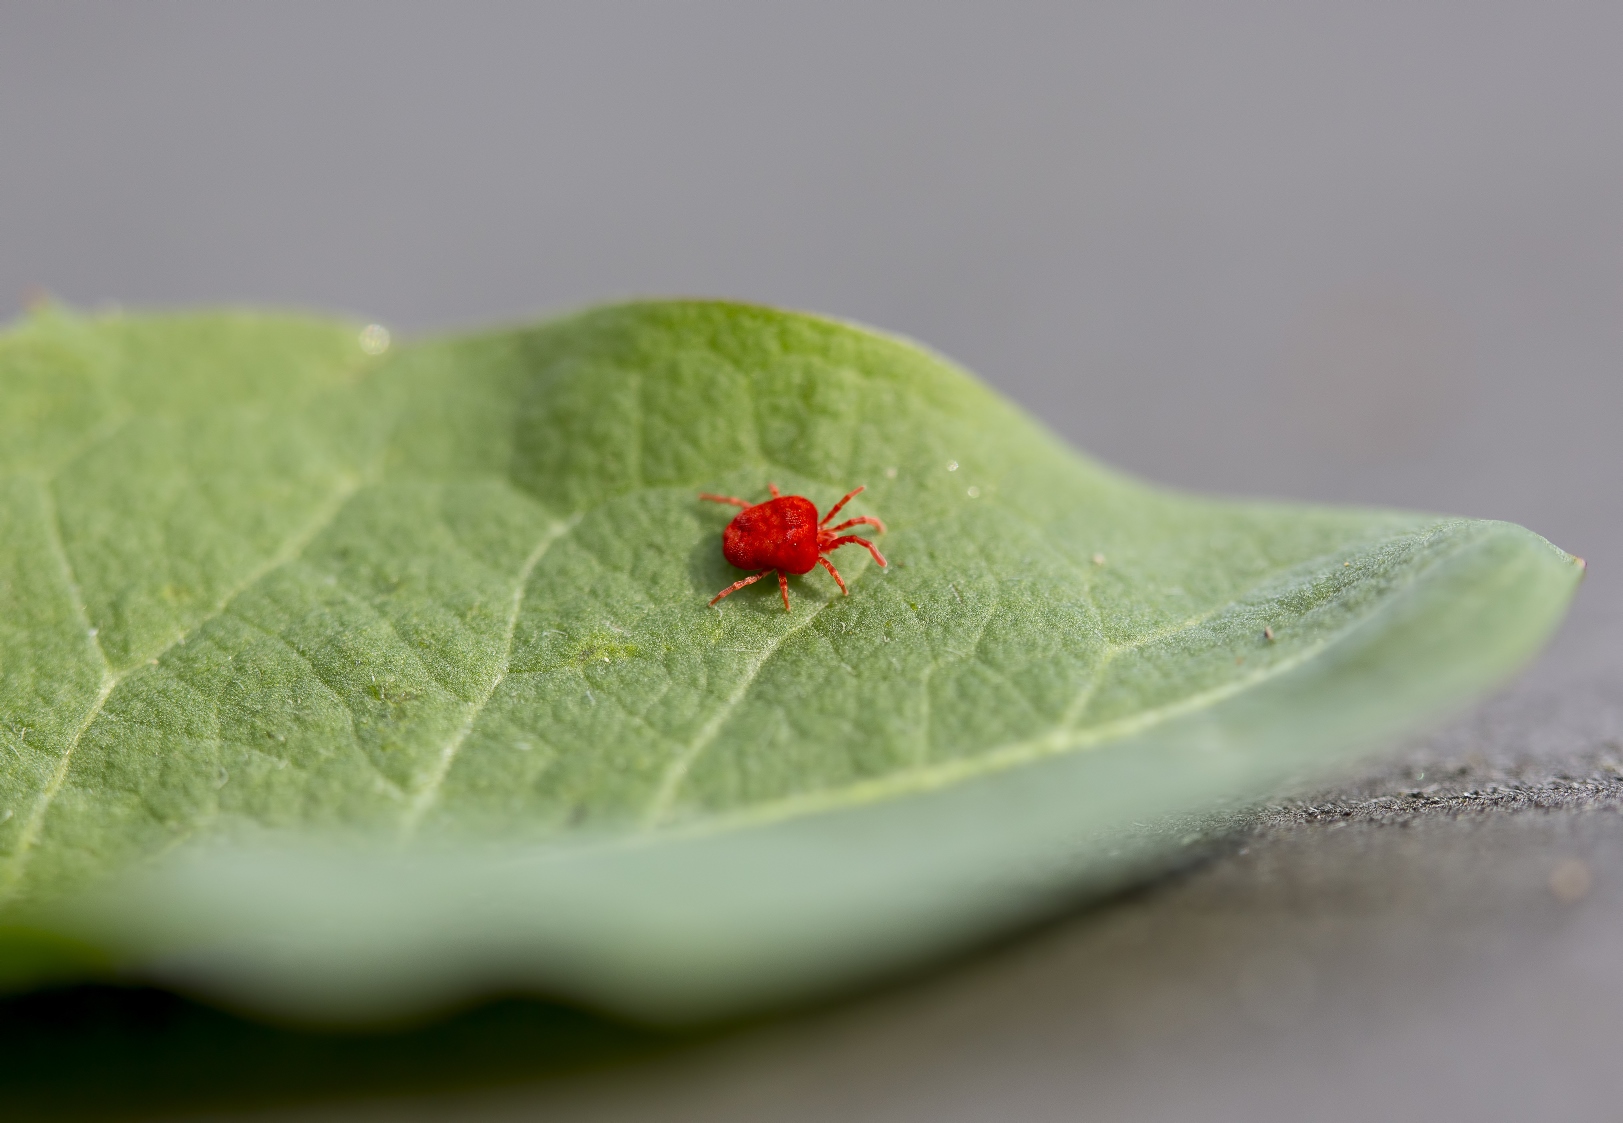 Red spider mites harm crops by sucking nutrients from their leaves. BioBeeâ€™s BioPersimilis is a natural predator of the spider mite and is harmless to plants. Image via Shutterstock.com